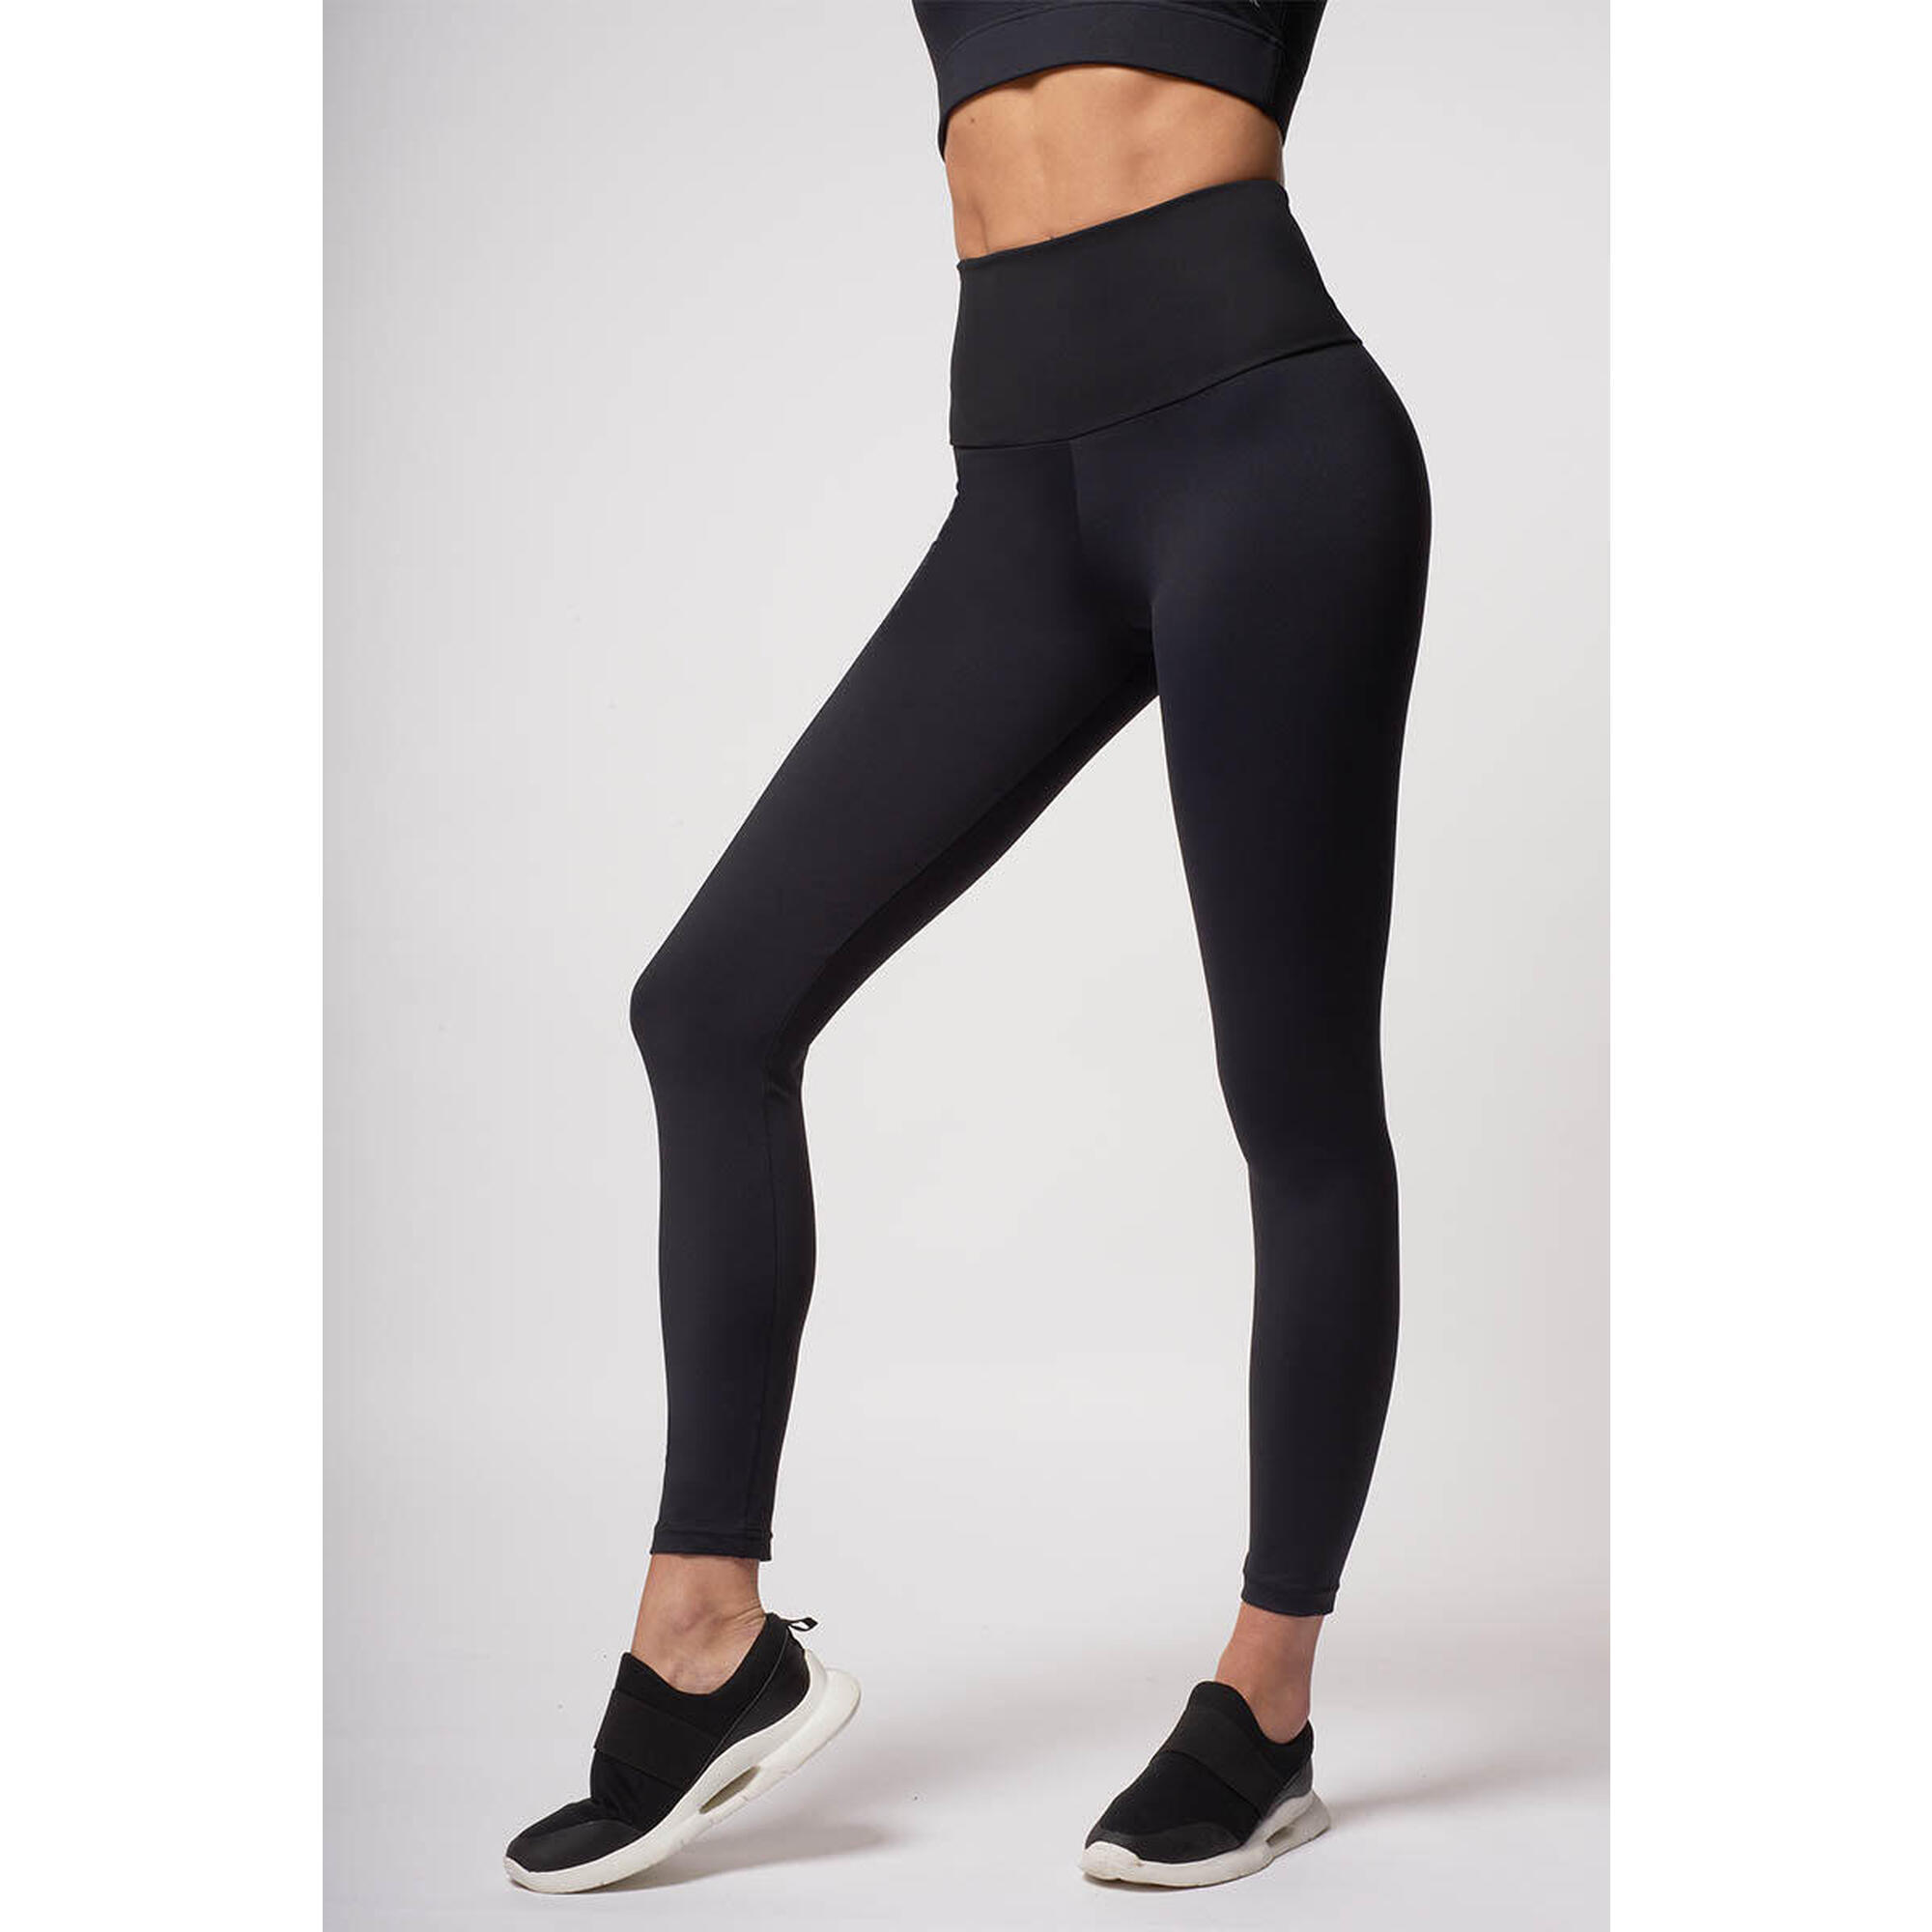 TLC SPORT High Rise Leggings with Thermal Brushed Fabric Black